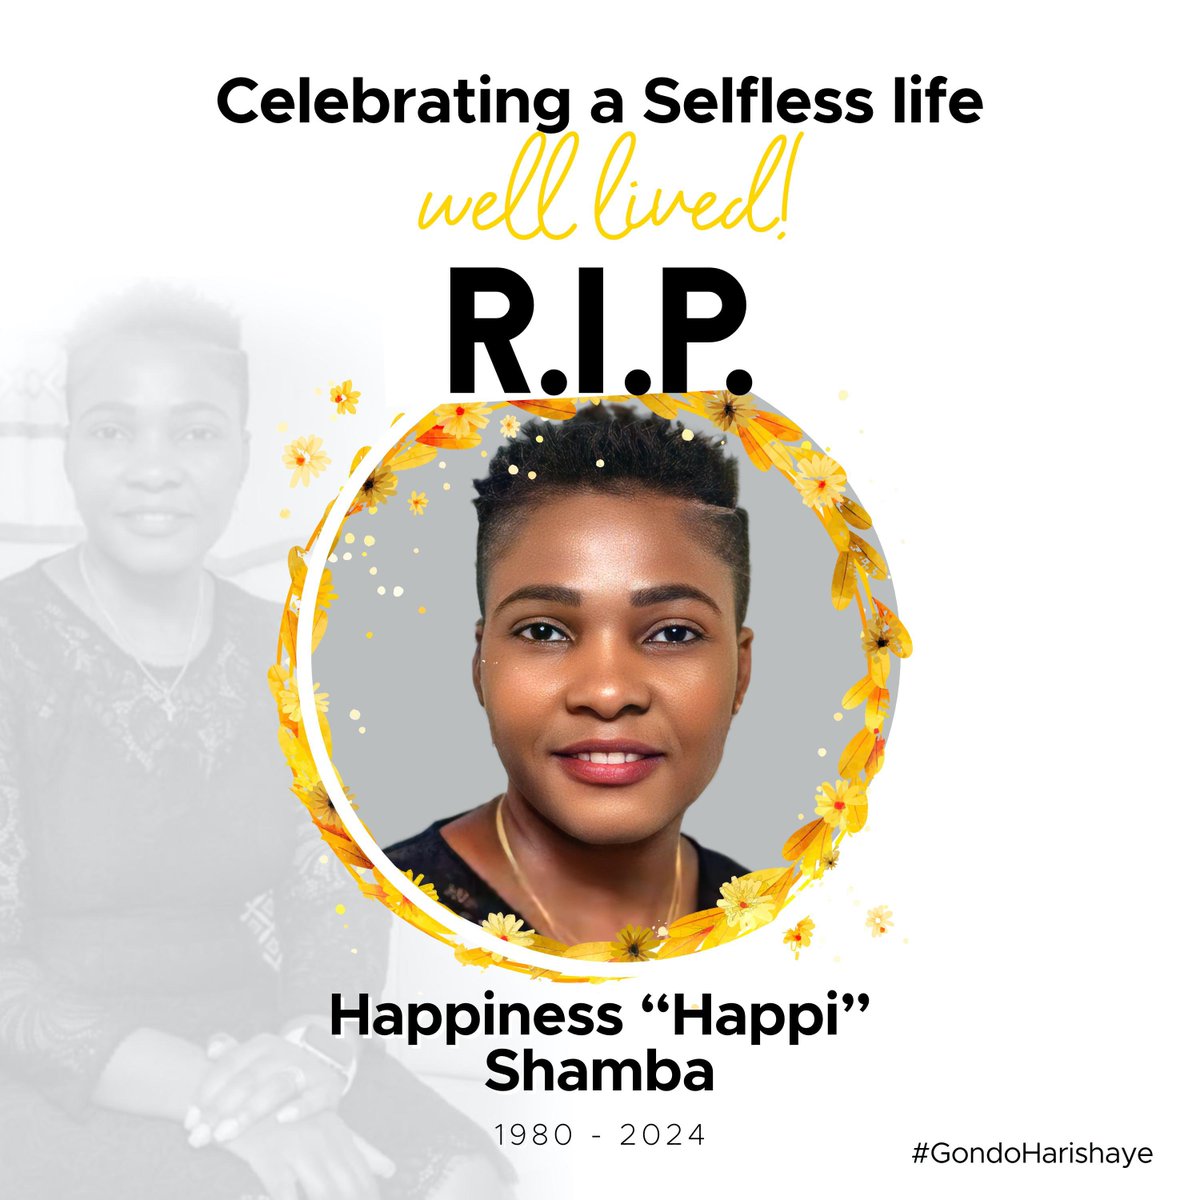 The Golden Eagles Football Club family joins our Vice Chairman, Zeph Shamba, in celebrating the life of his dearly departed wife and friend, Happiness. Hers was a life well lived and she will be missed by many.